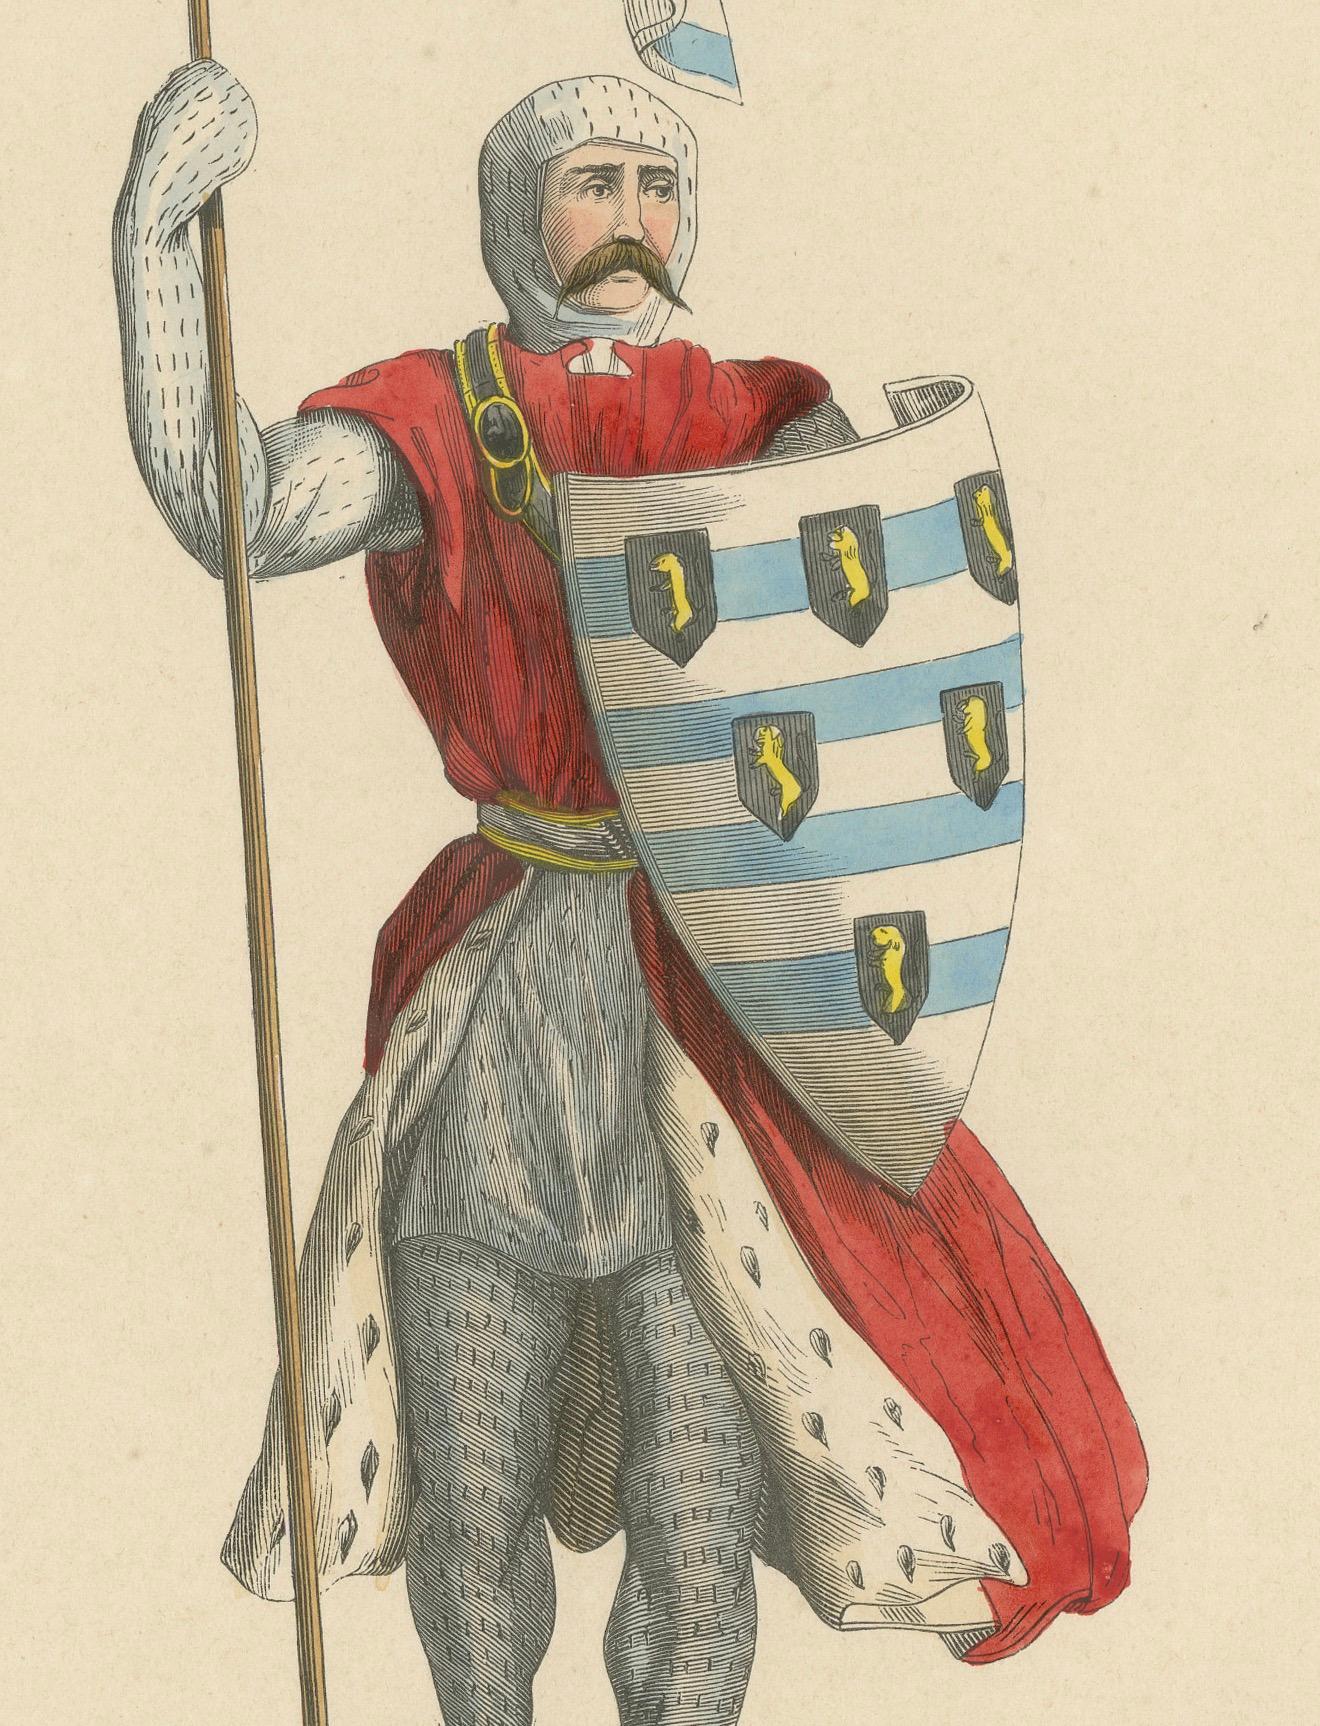 John Sitsylt, the Heraldic Knight in an Original Hand-Colored Lithograph of 1847 For Sale 2